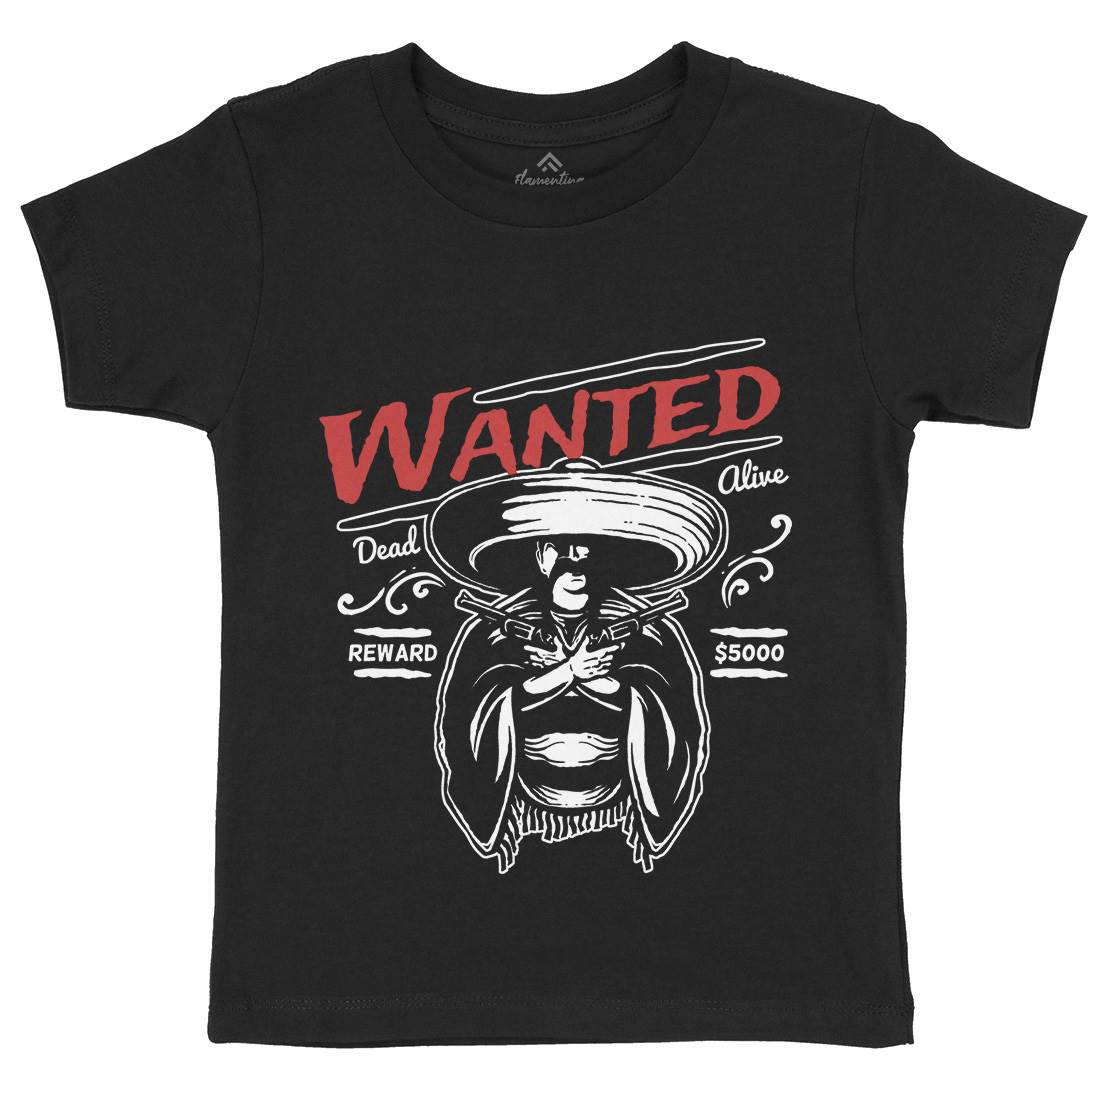 Wanted Kids Crew Neck T-Shirt American A391